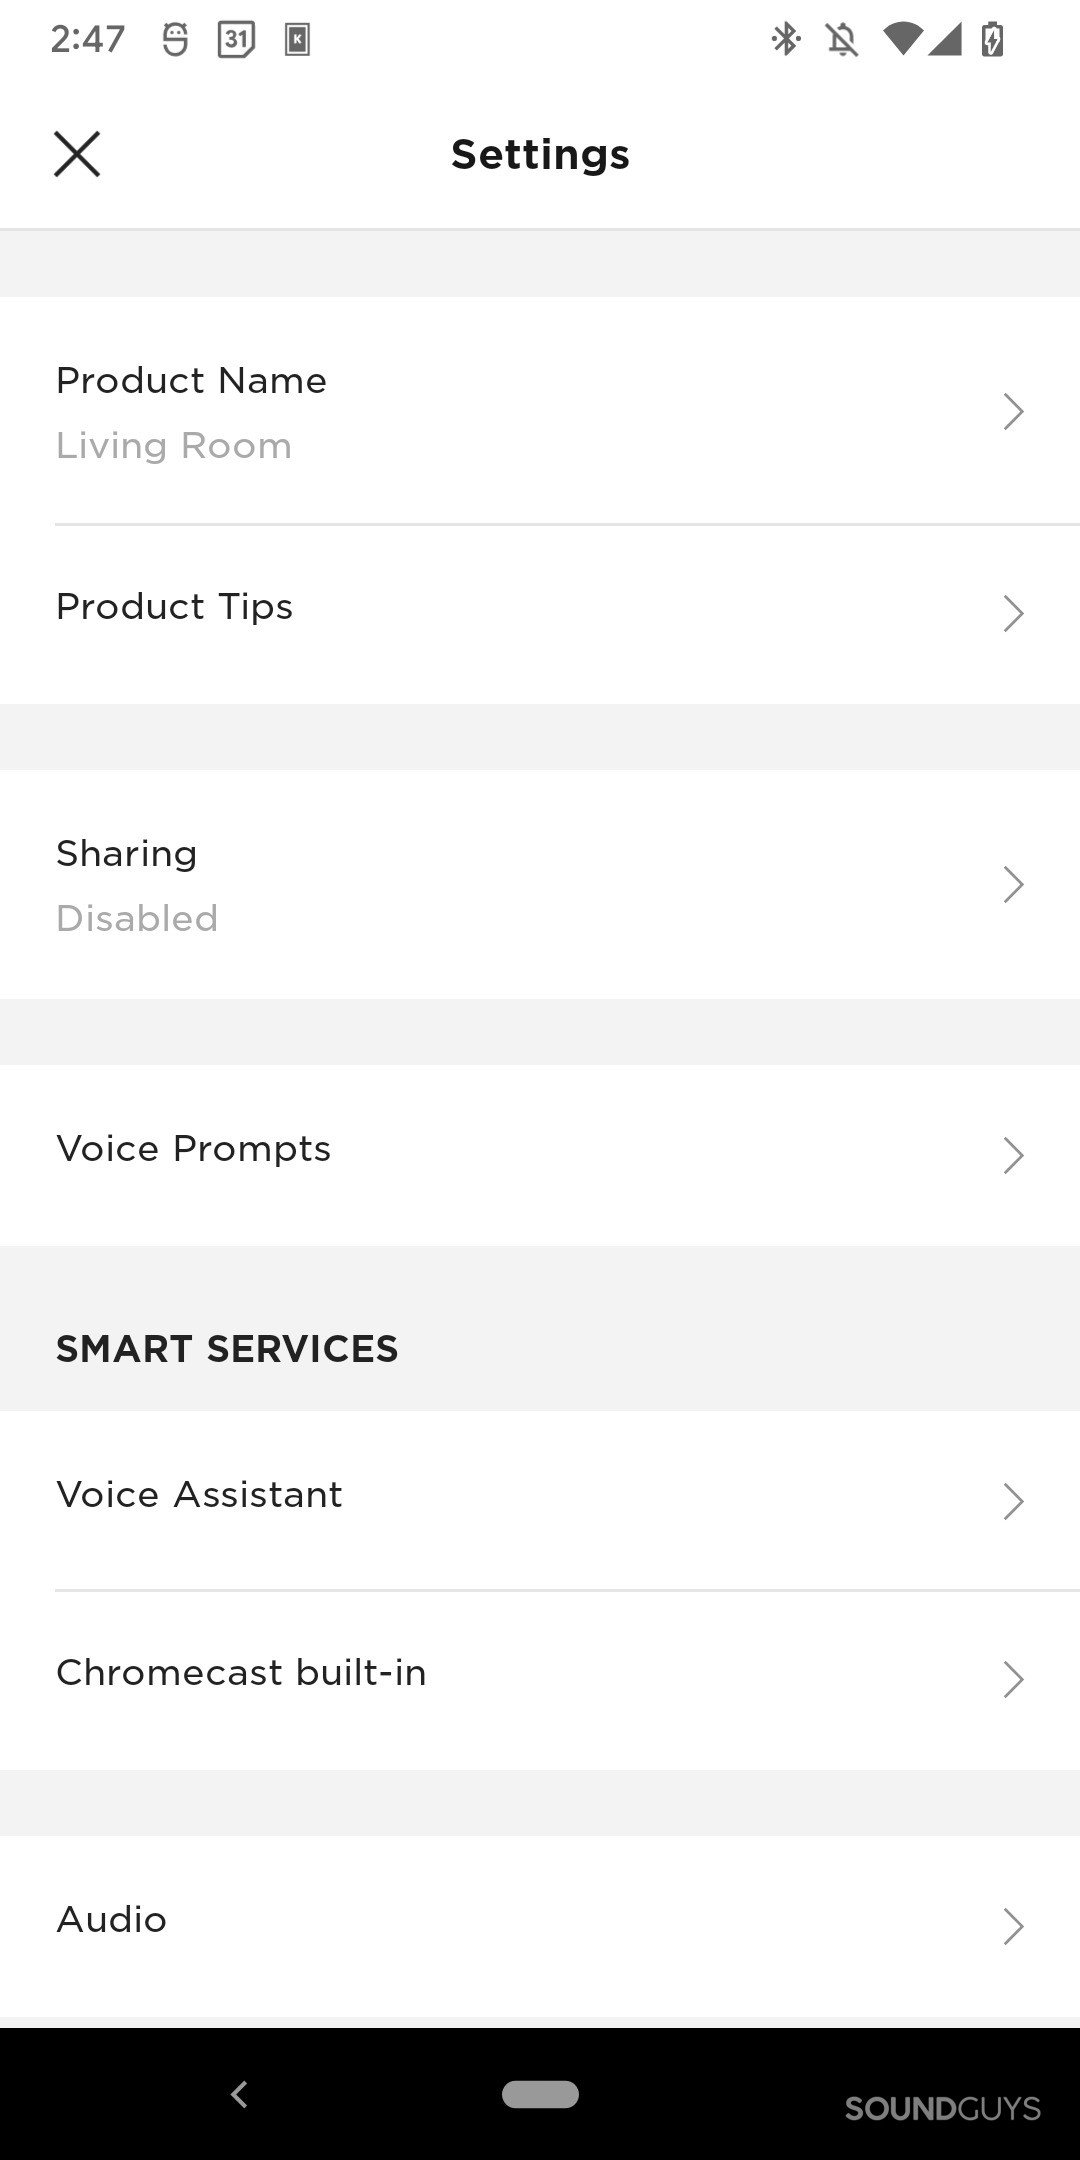 A screenshot of settings for the Bose Portable Smart Speaker in the Bose Music app.